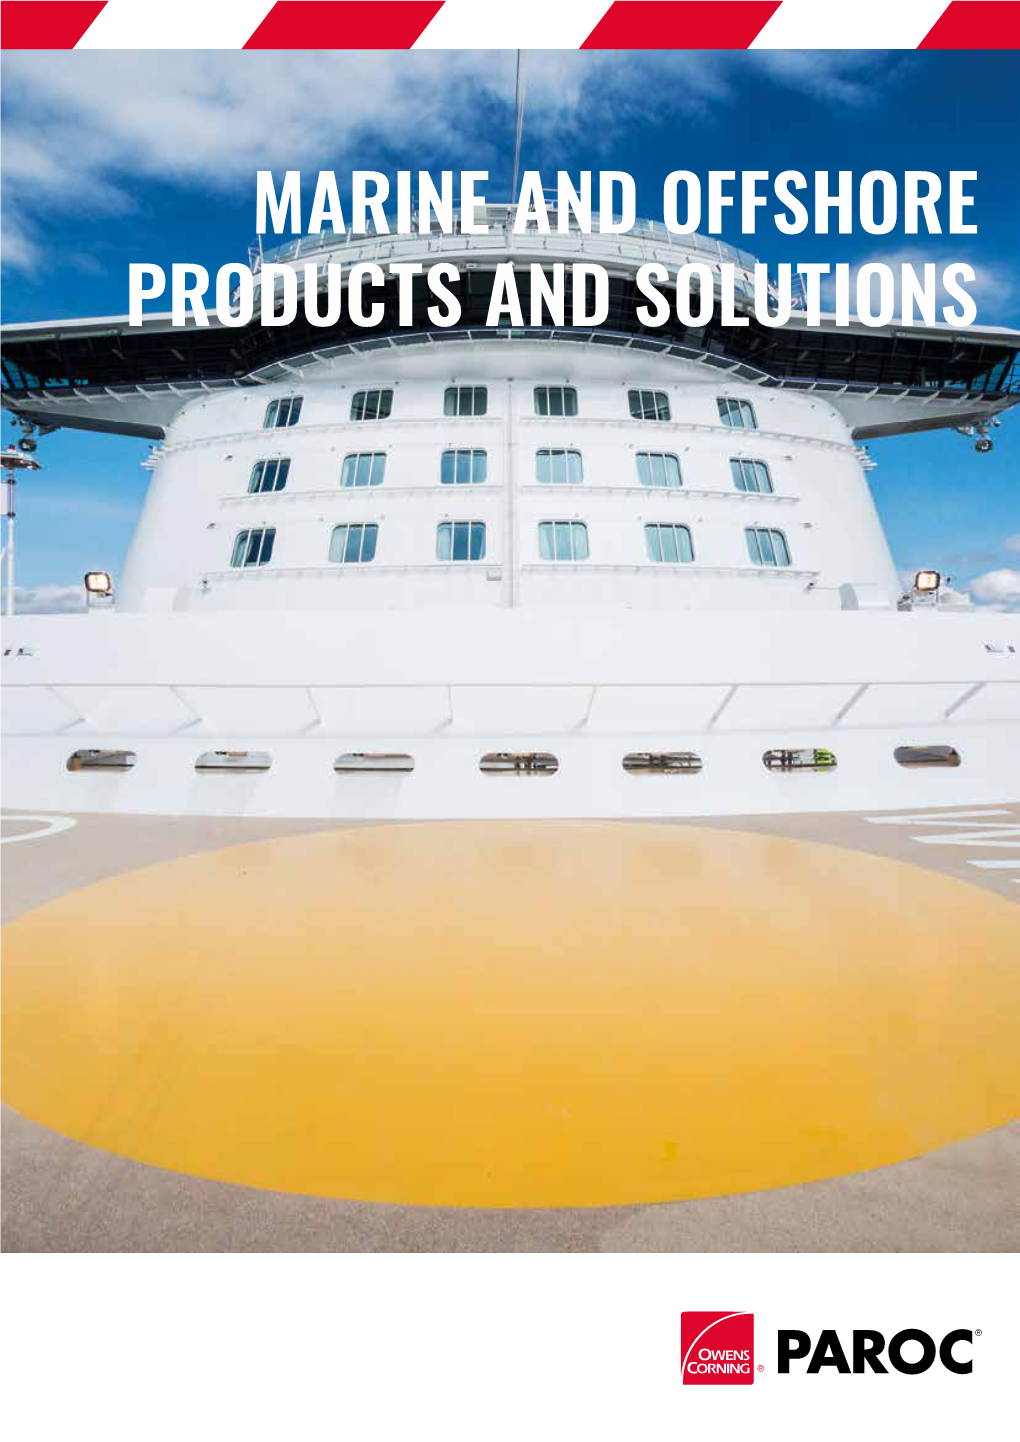 Paroc Marine and Offshore Products and Solutions